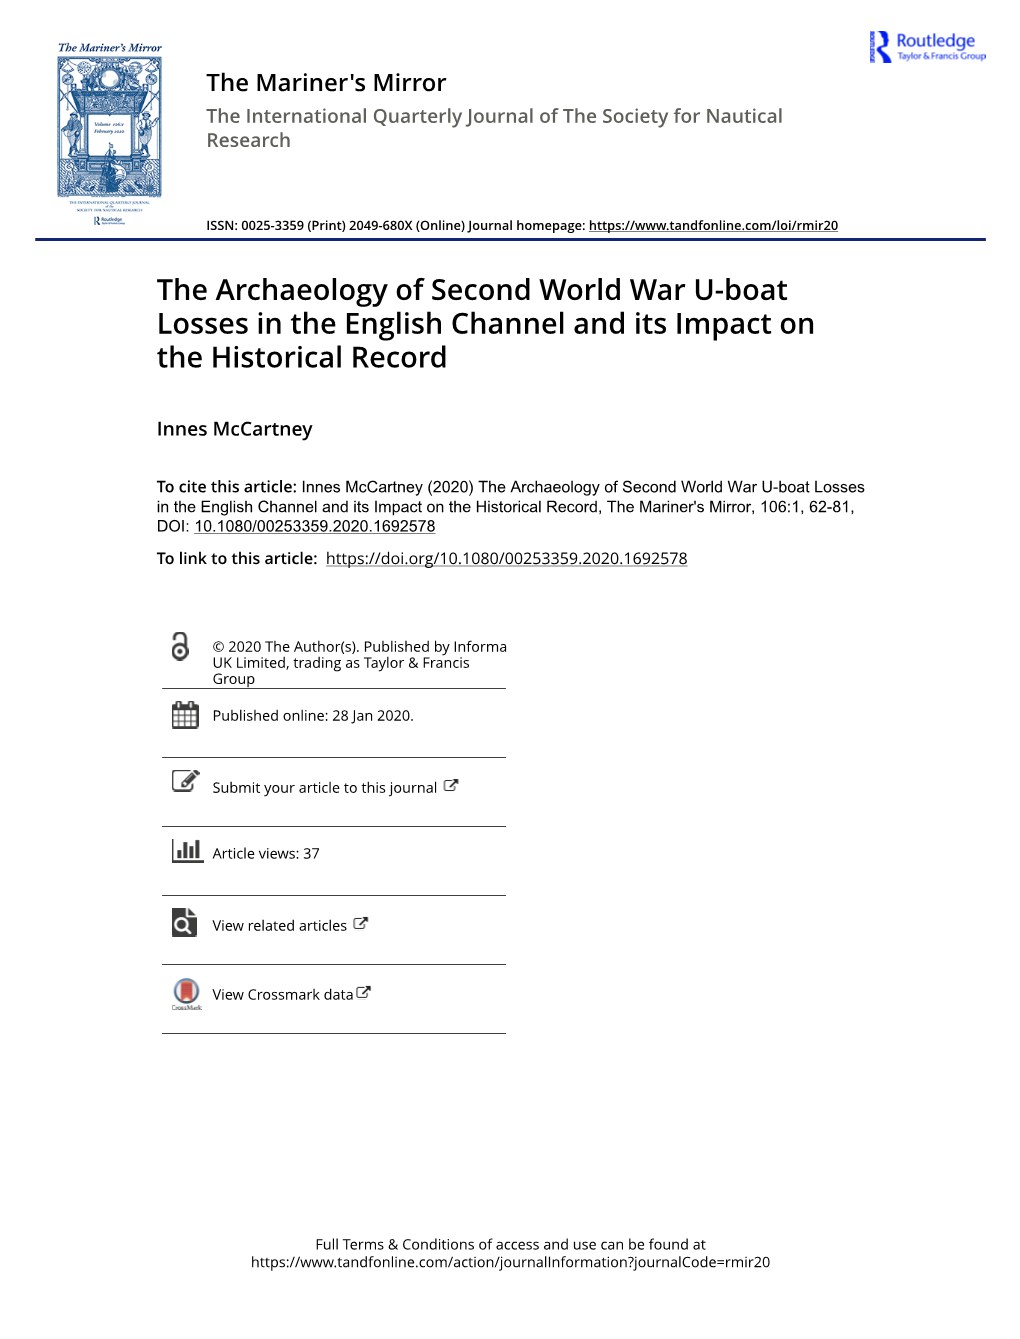 The Archaeology of Second World War U-Boat Losses in the English Channel and Its Impact on the Historical Record